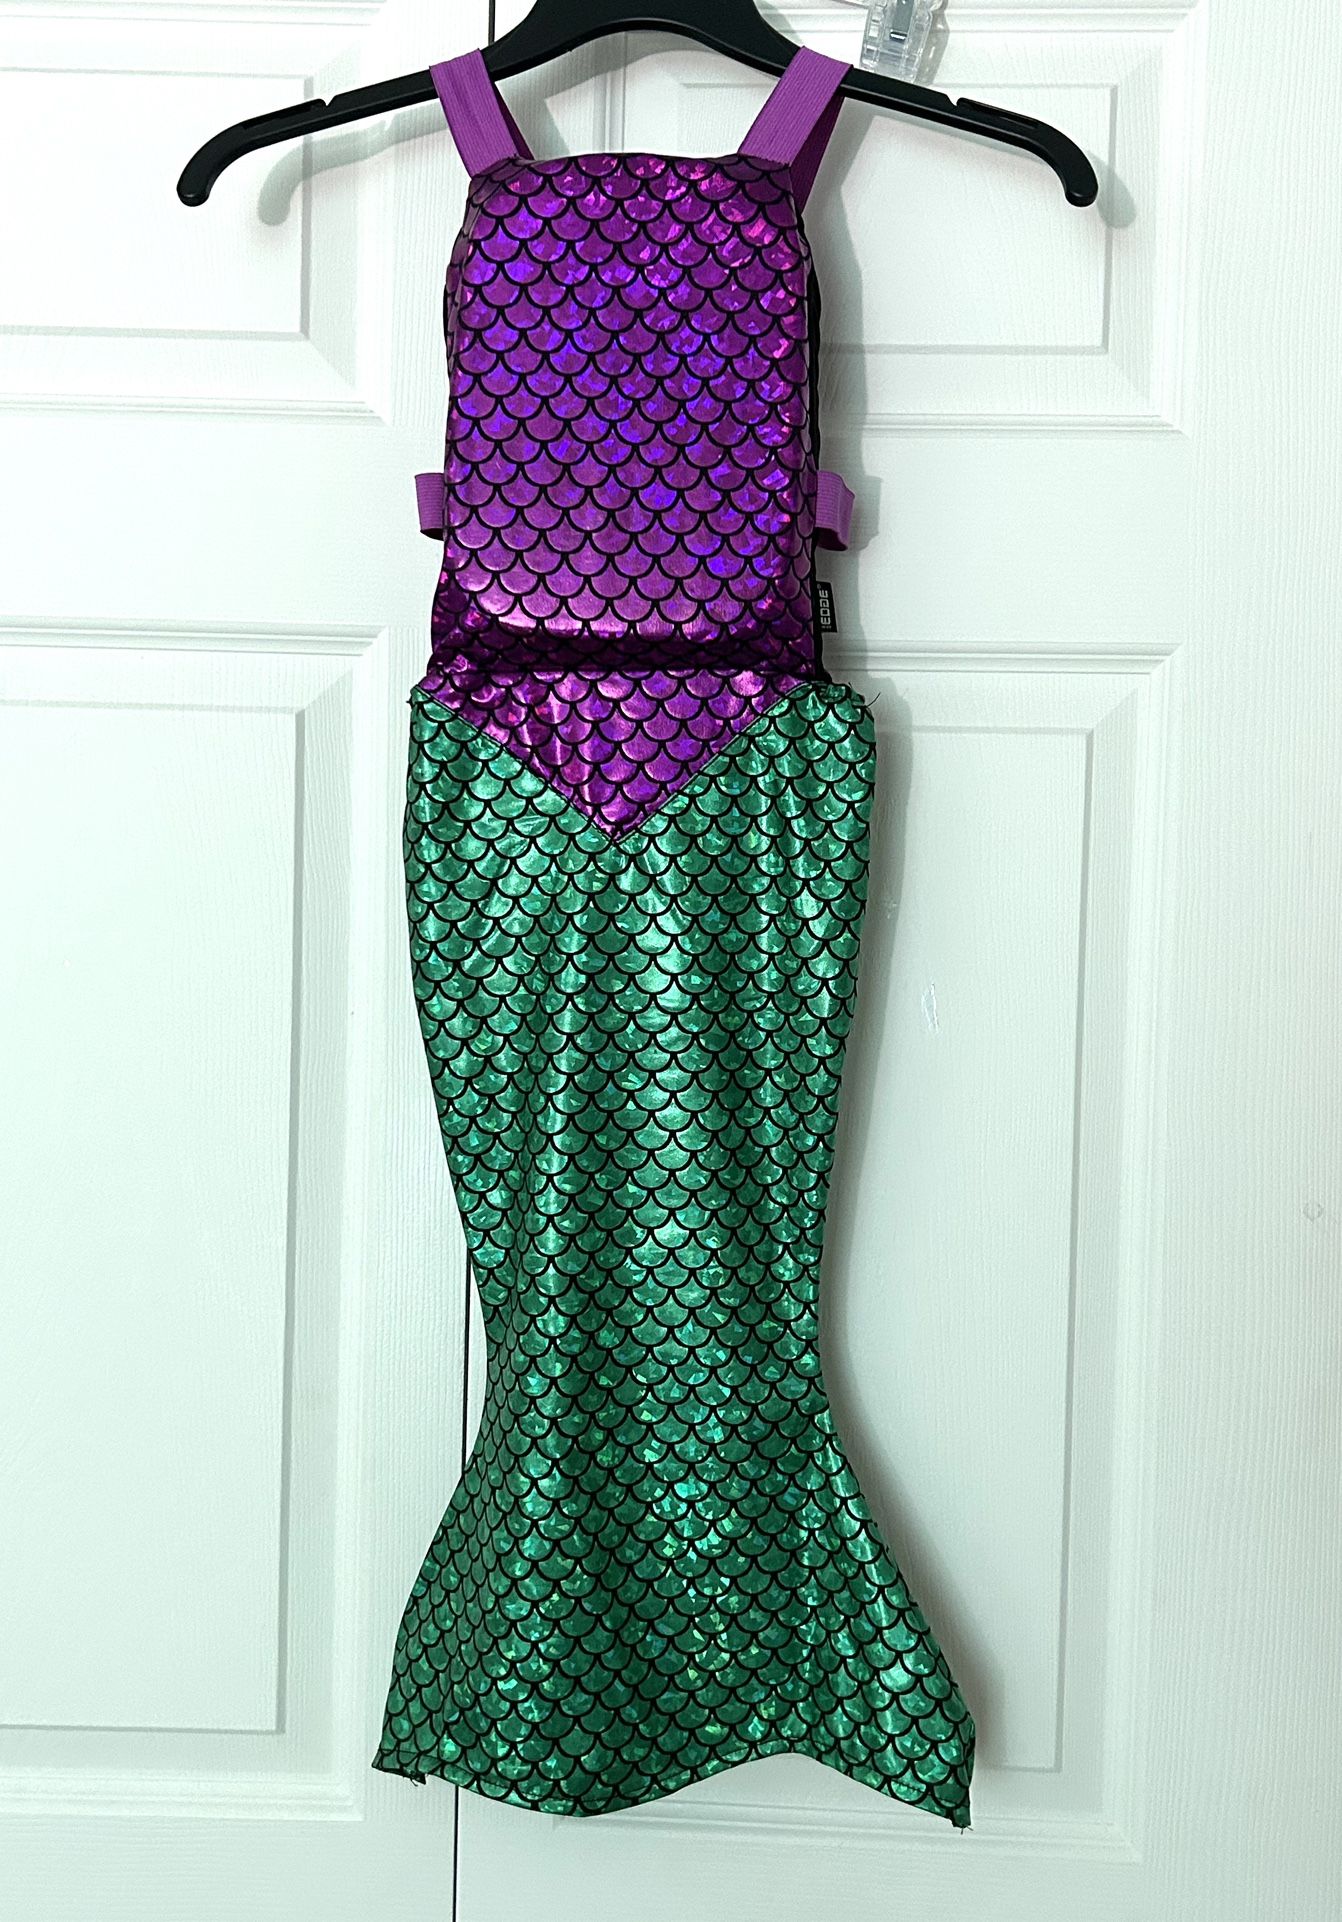 Mermaid Child Dress up Floaty & a Bathing Suit 